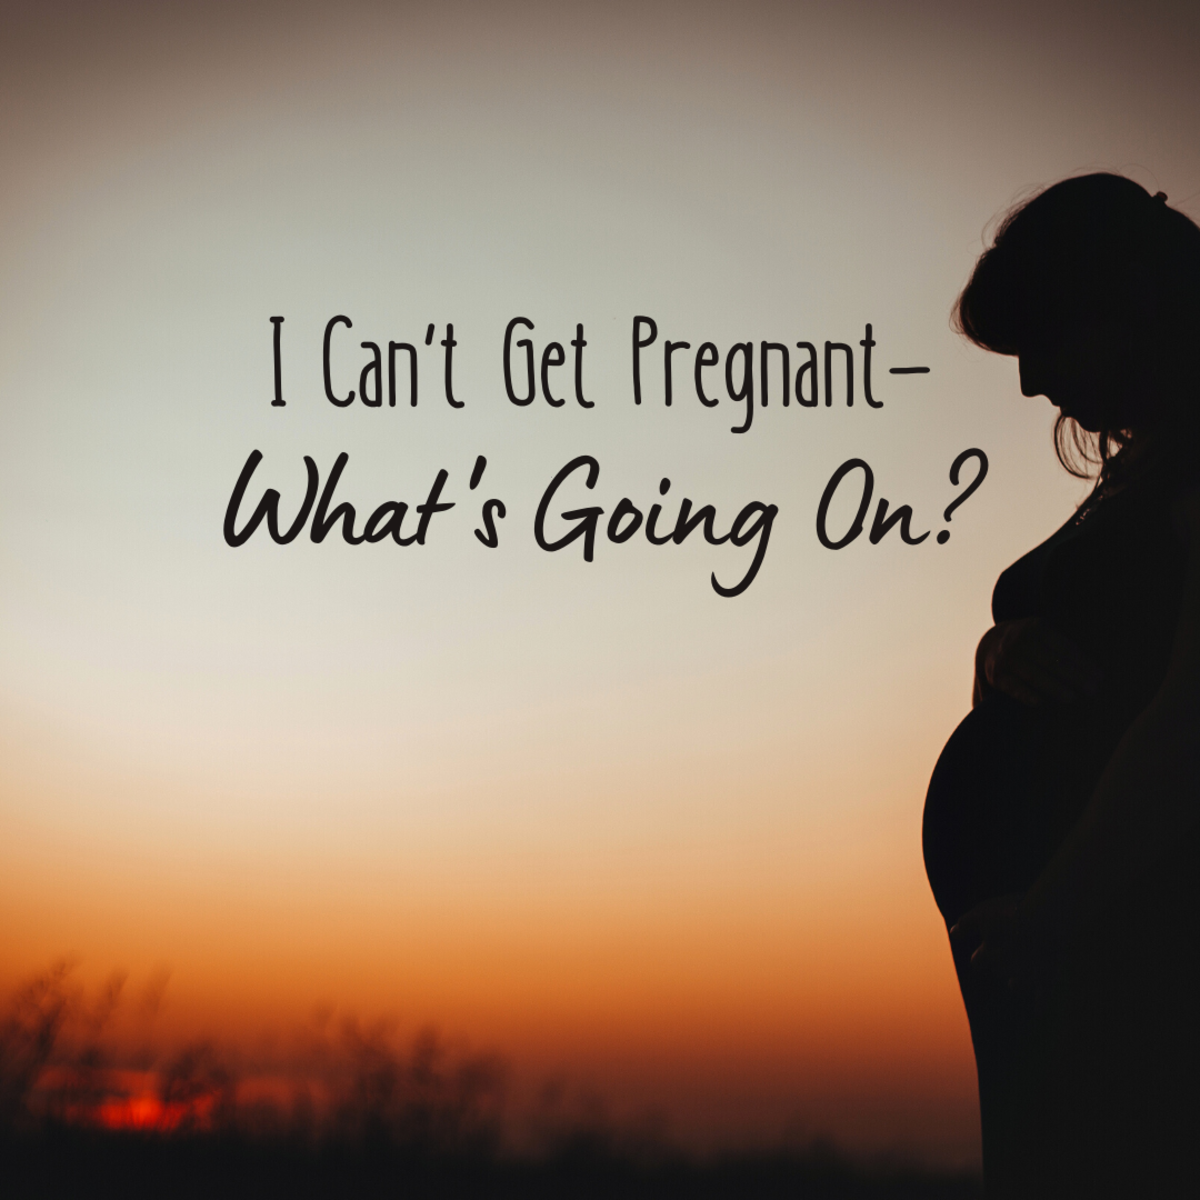 Why Can't I Get Pregnant?